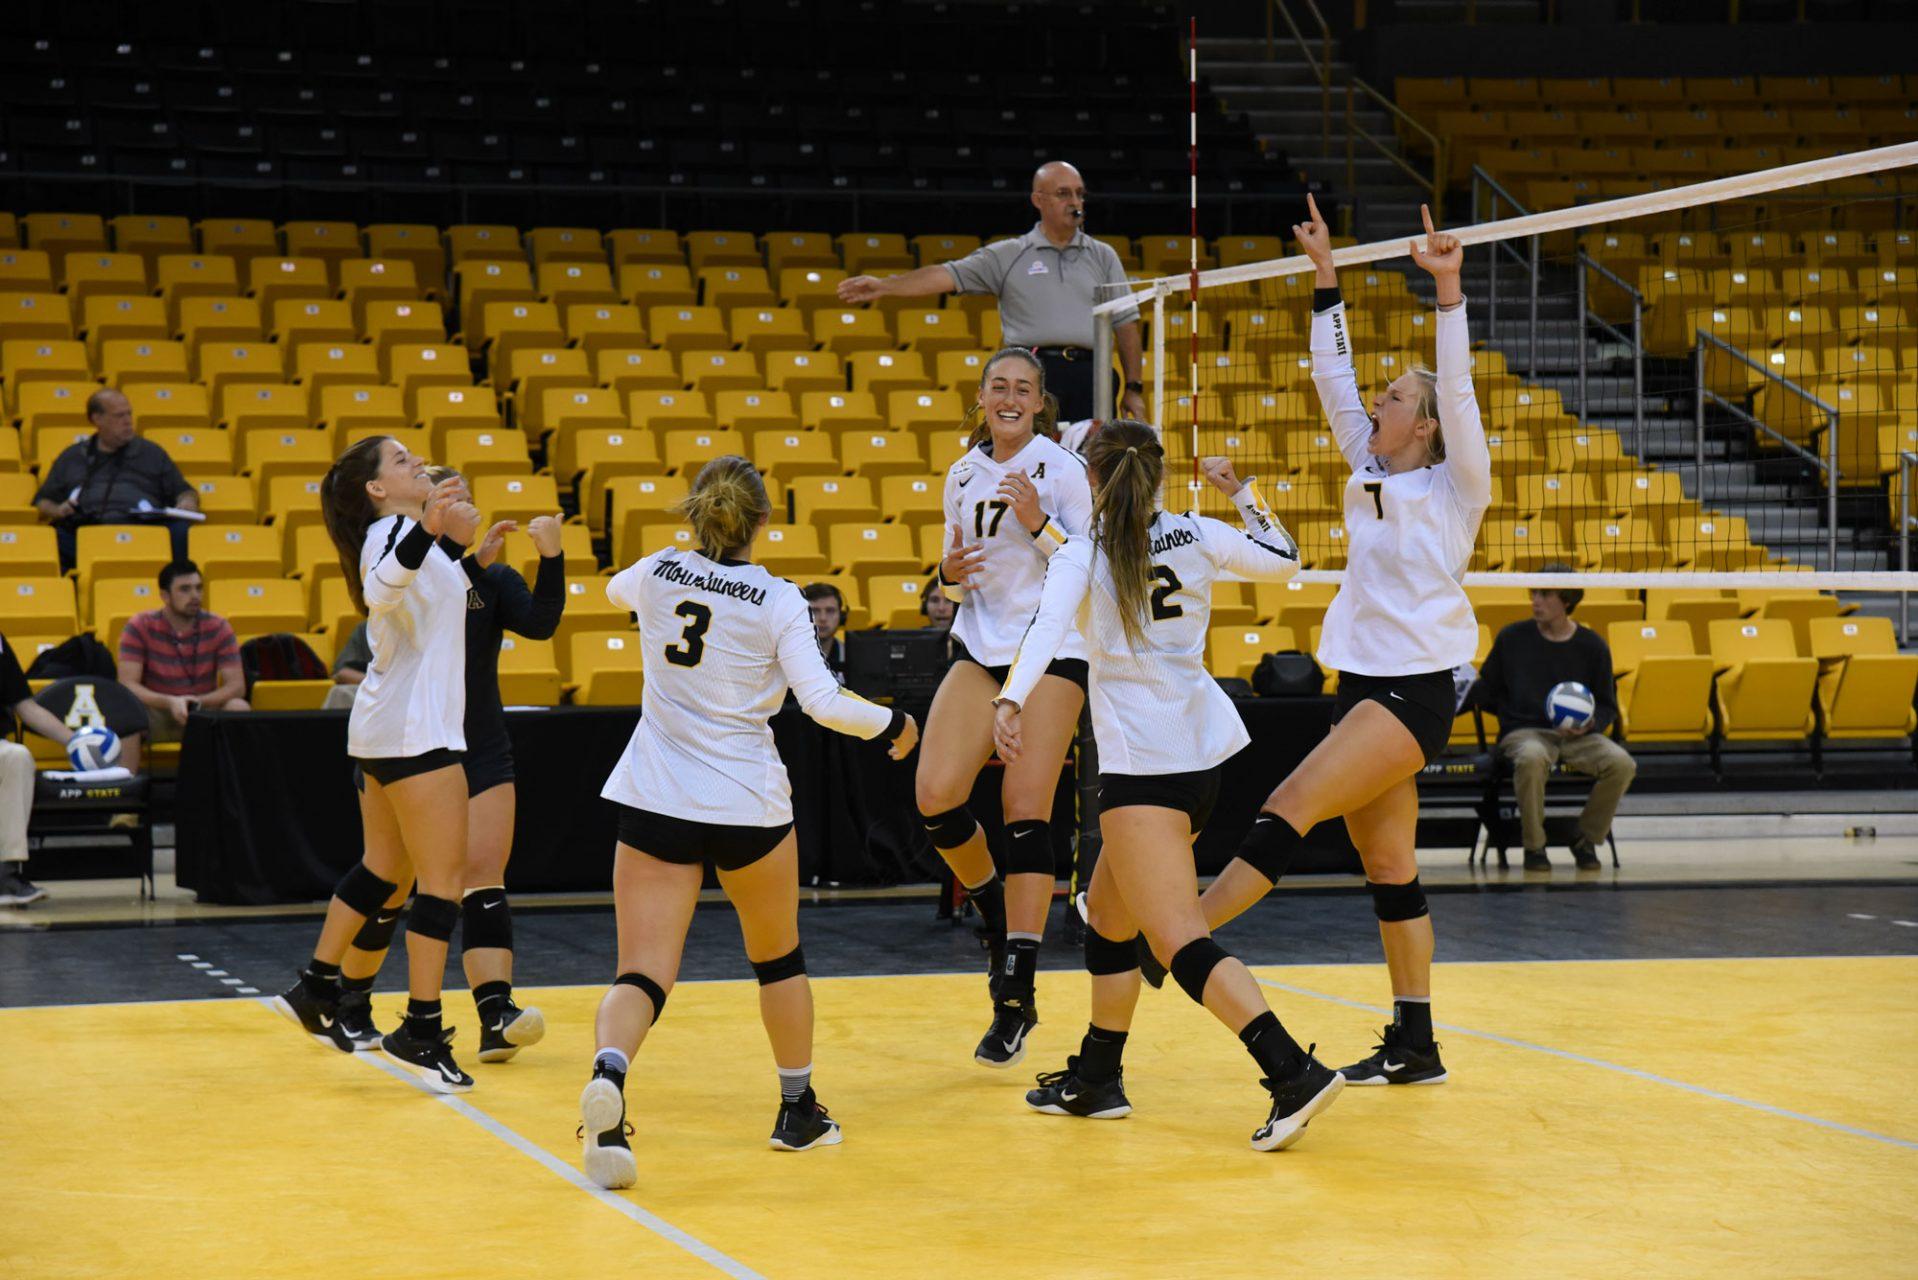 The Appalachian State Volleyball team celebrates a point from a spike during a home game against Georgia Southern in 2017.  The Mountaineers currently sit at 2-4 and will host Iowa State in the Appalachian Invitational on Sept. 13